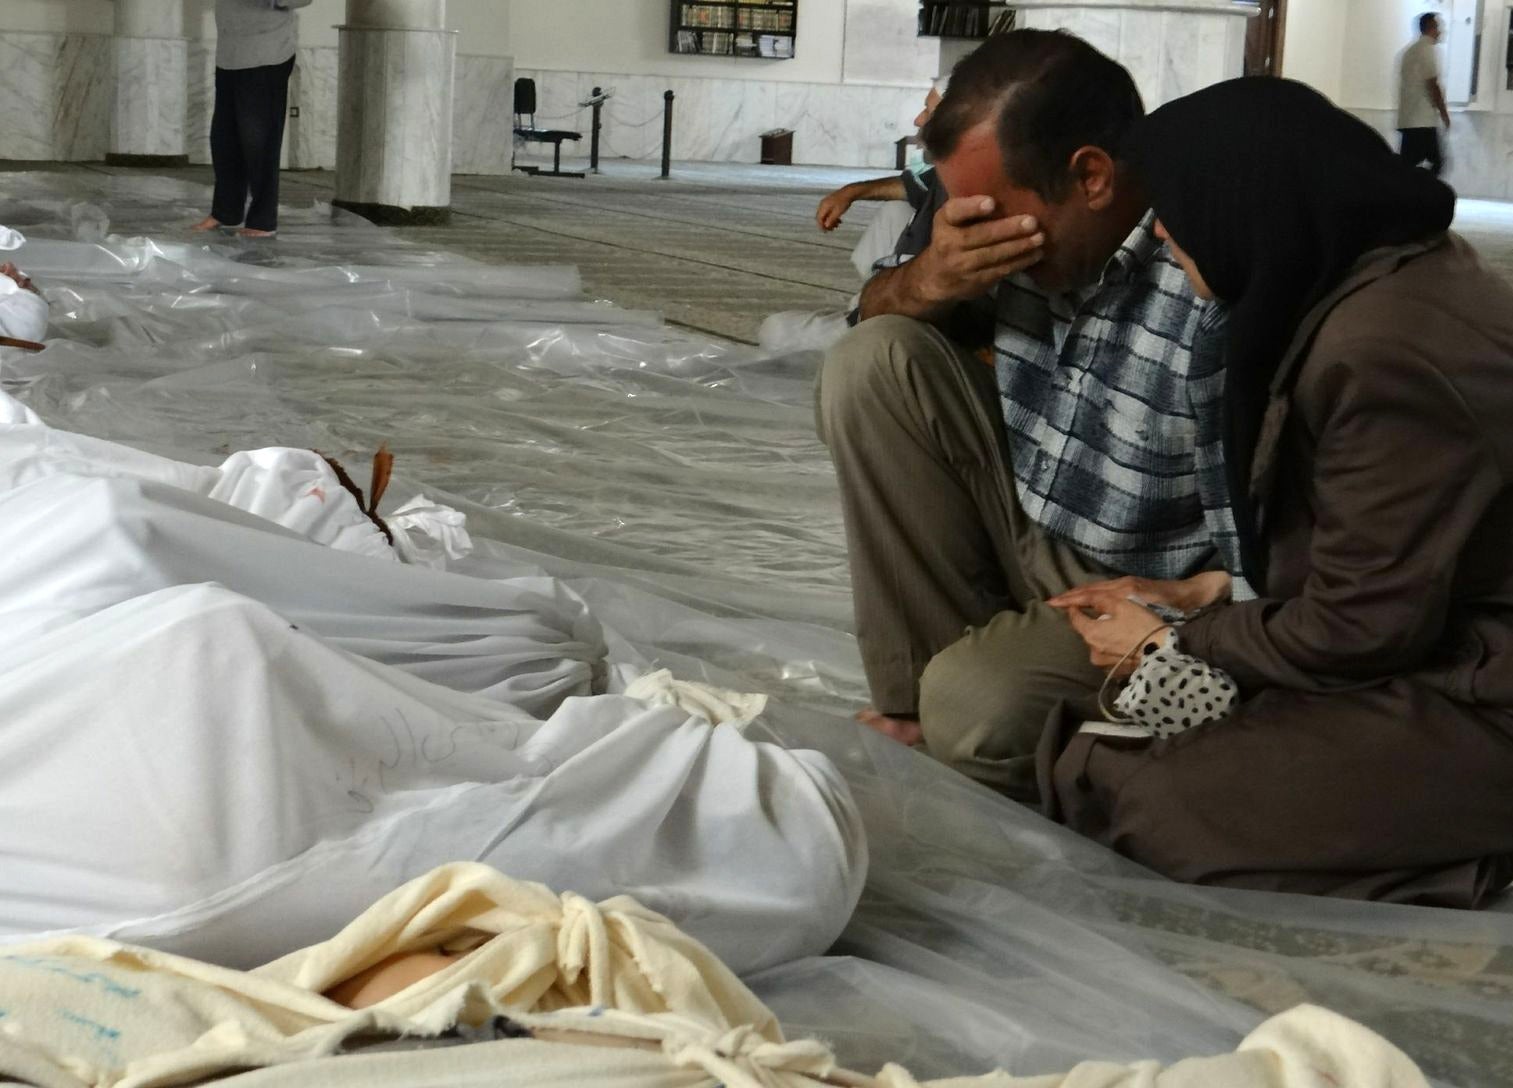 A Syrian couple mourn in front of bodies following what has now been confirmed by the UN as a toxic gas attack